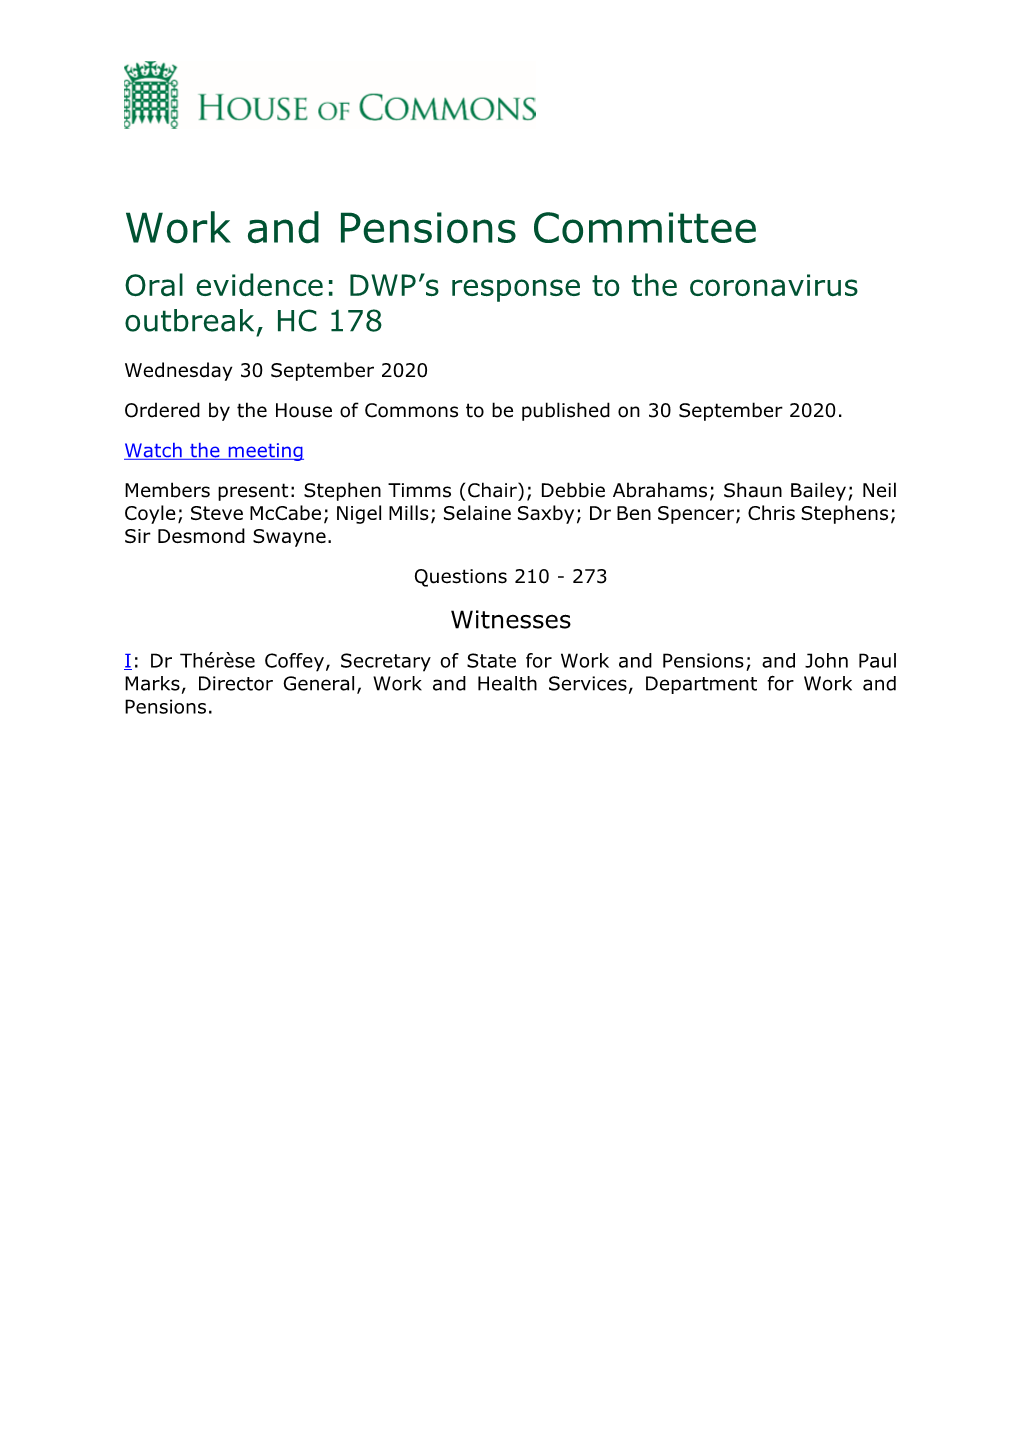 Work and Pensions Committee Oral Evidence: DWP’S Response to the Coronavirus Outbreak, HC 178